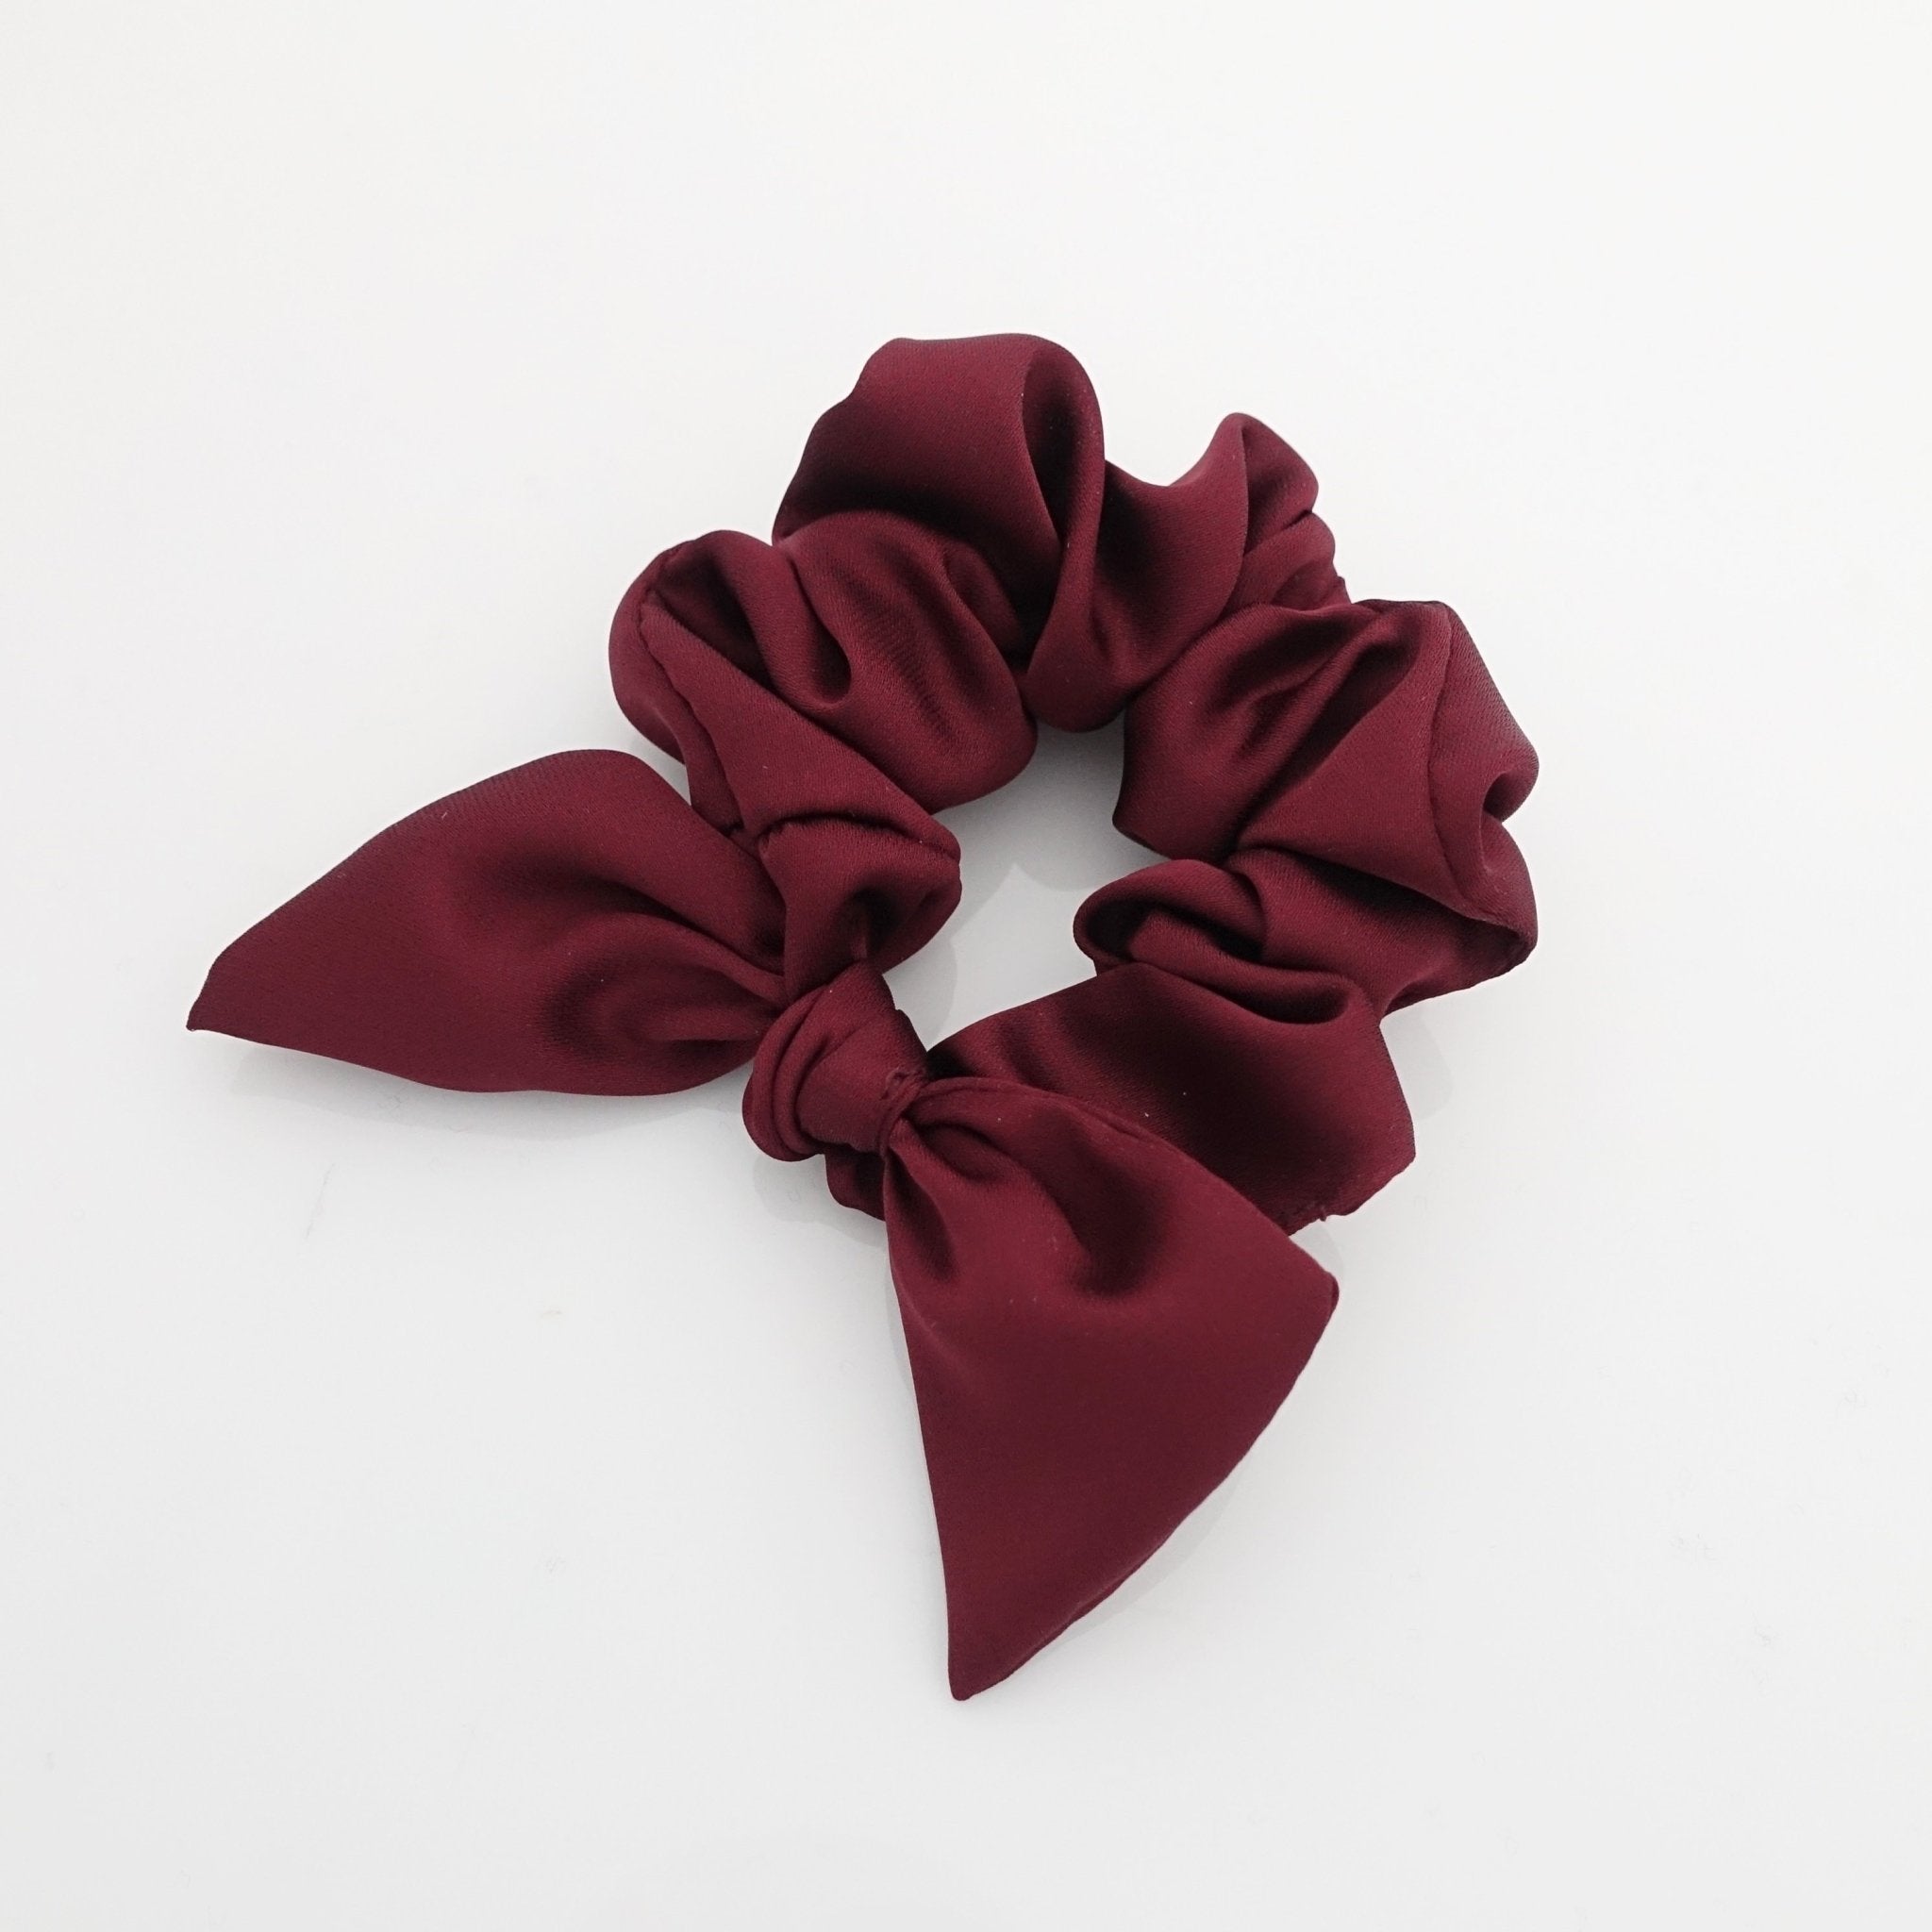 veryshine.com scrunchies/hair holder Red wine glossy satin bow knot hair scrunchie cute casual hair accessory scrunchies for women